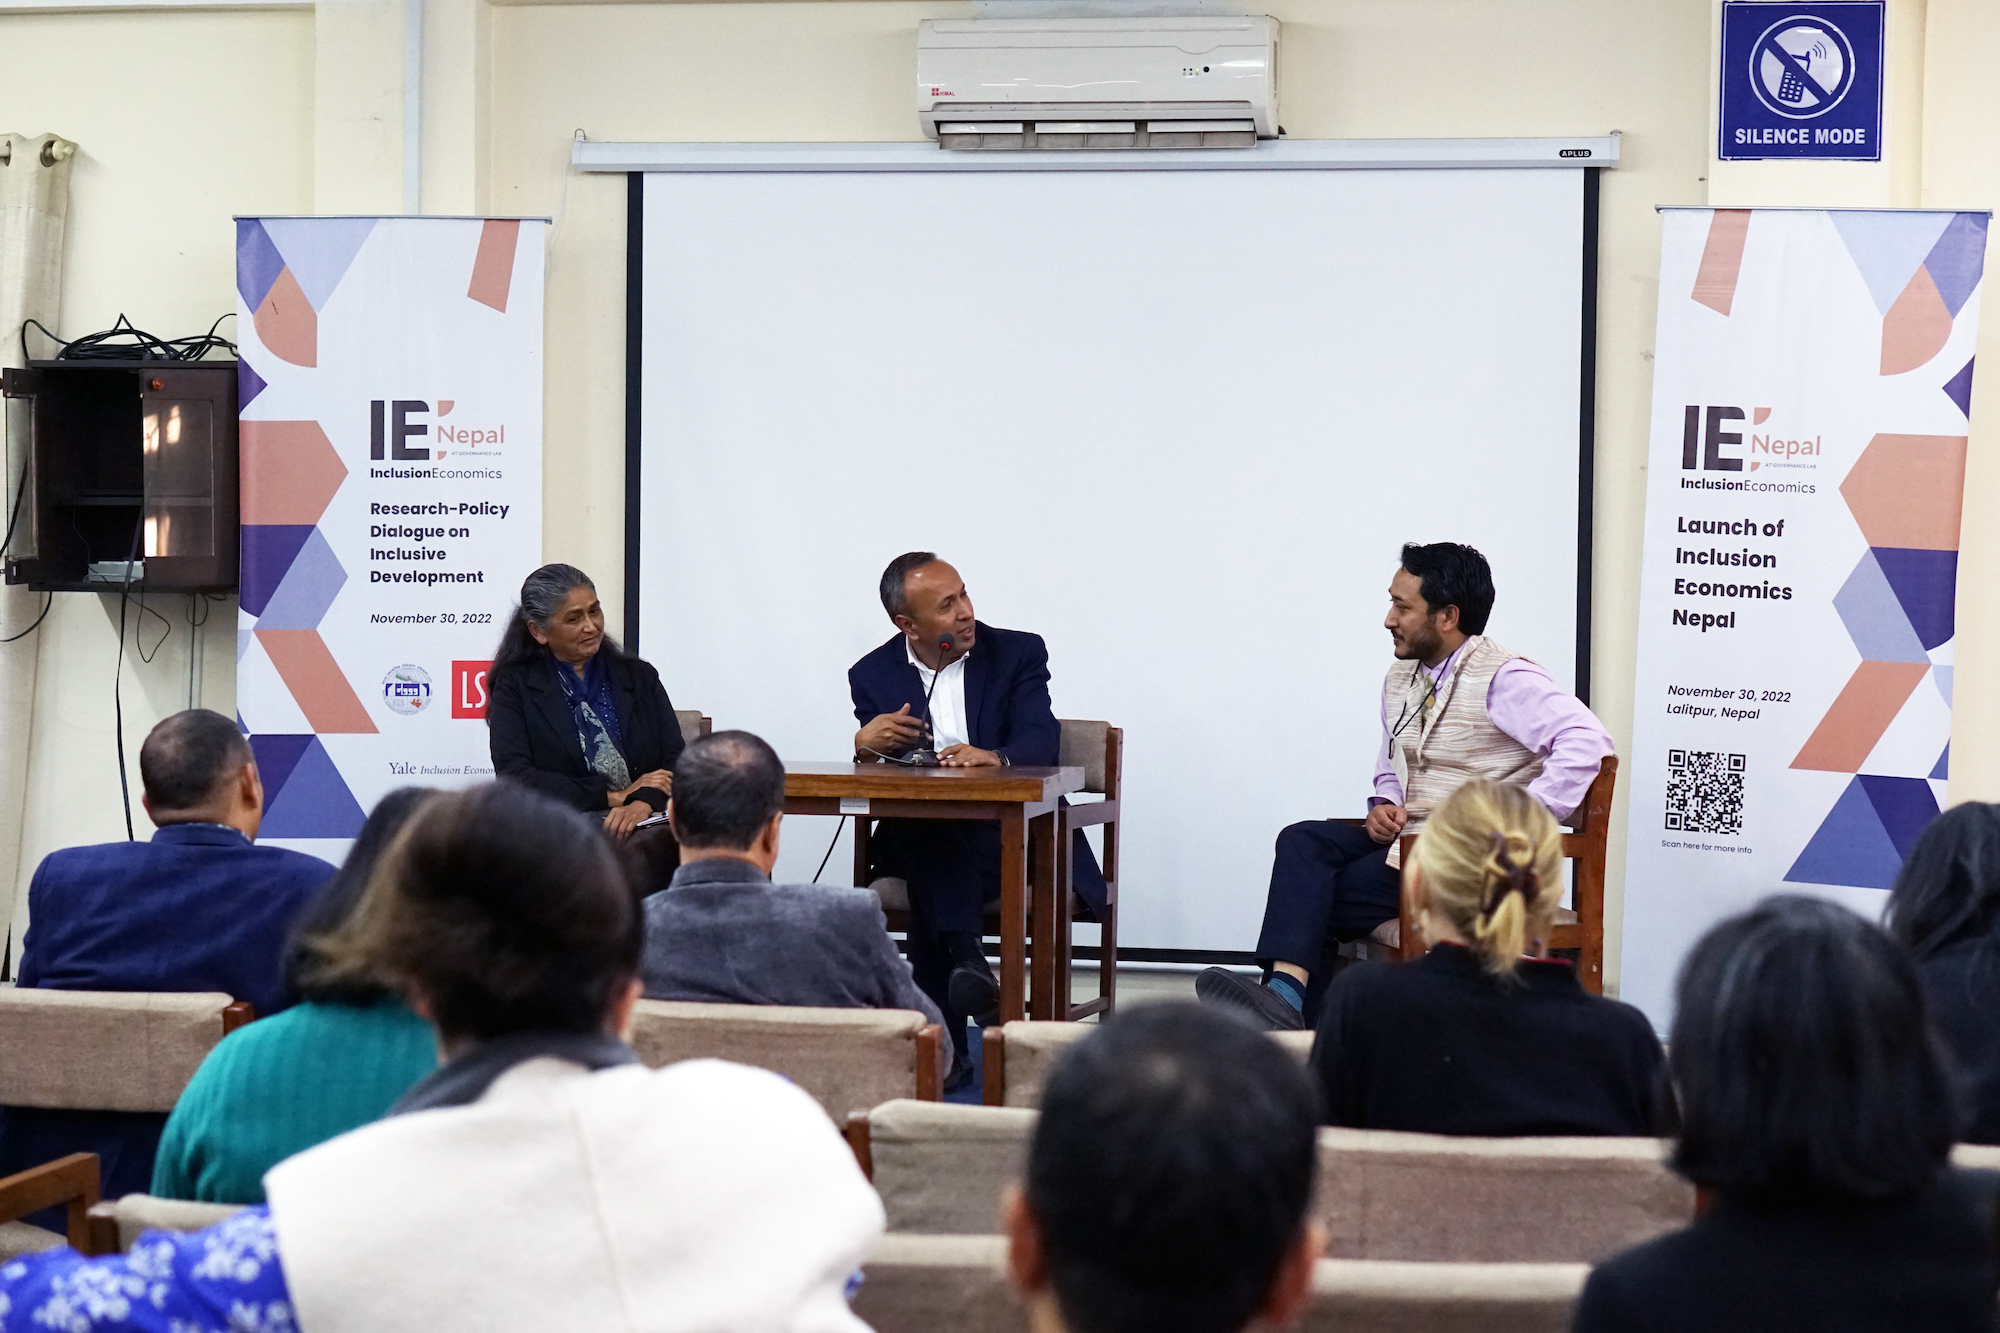 Dr. Binda Pandey, Politician and Author of "Women in Nepali Politics" and Kewal Bhandari, Secretary of the Nepal National Planning Commission in conversation with Pukar Malla, Chairperson of Governance Lab